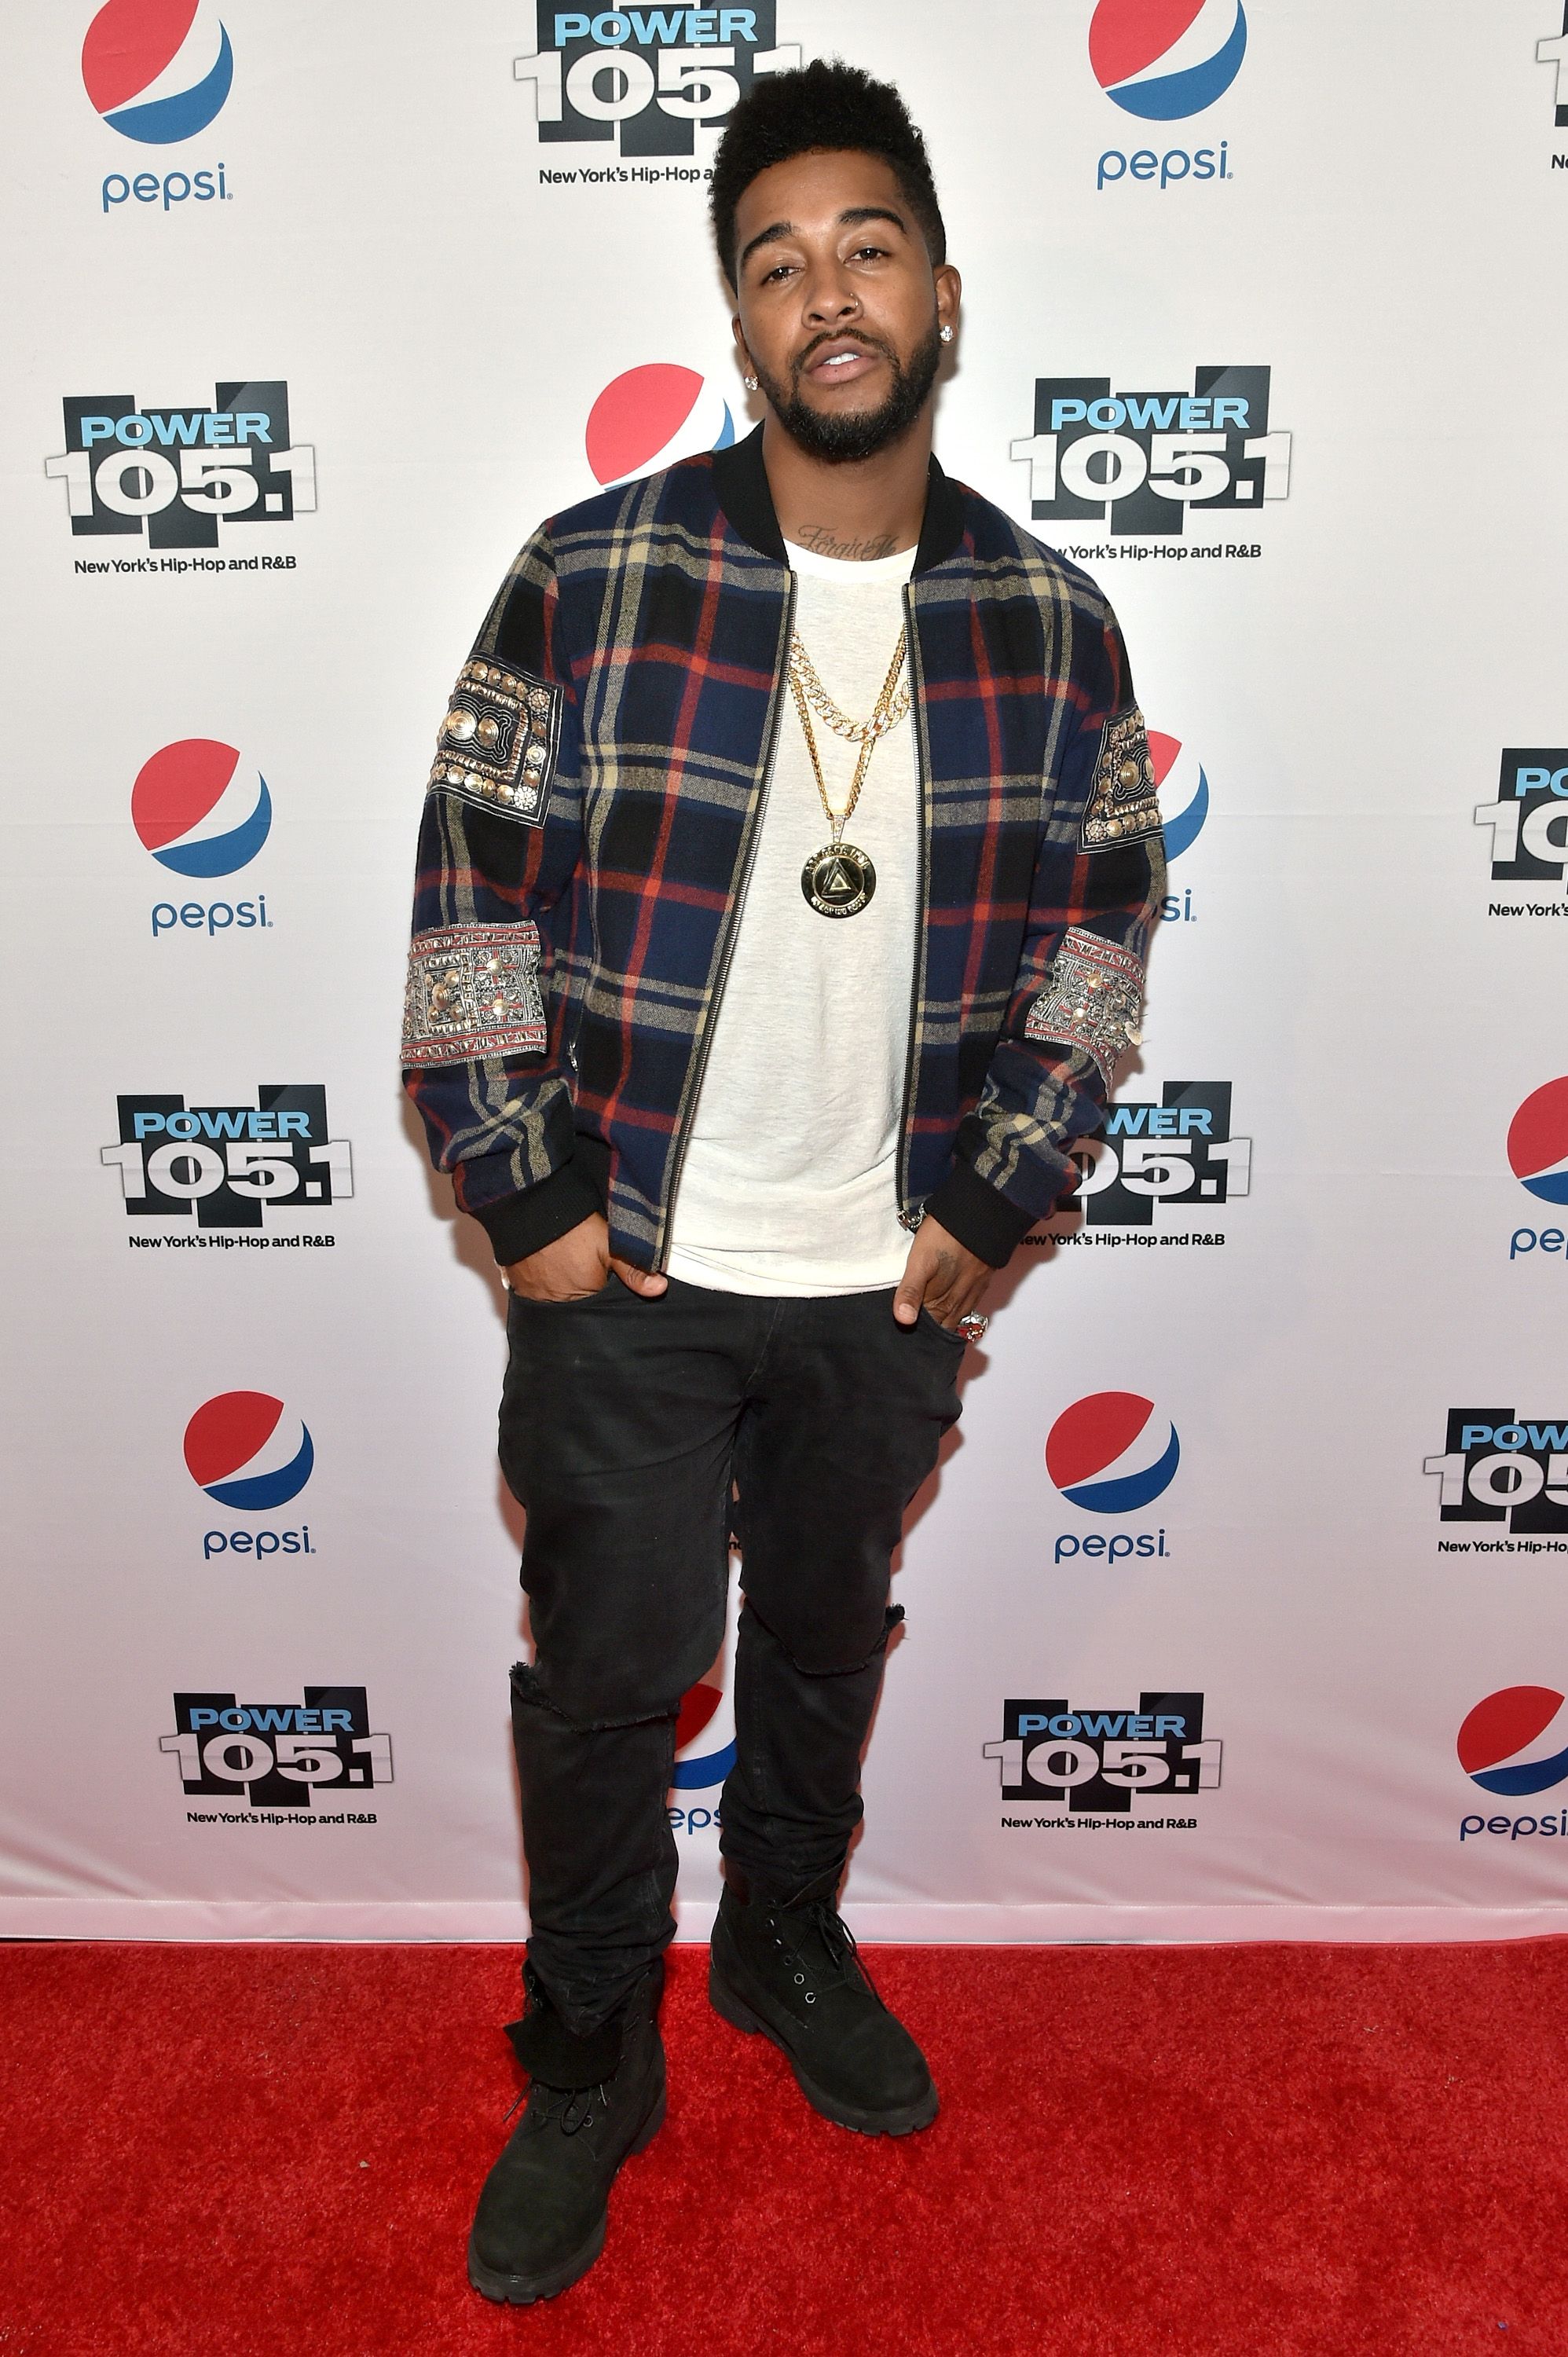 Omarion at Power 105.1's Powerhouse 2015 on October 22, 2015 in Brooklyn. | Photo: Getty Images